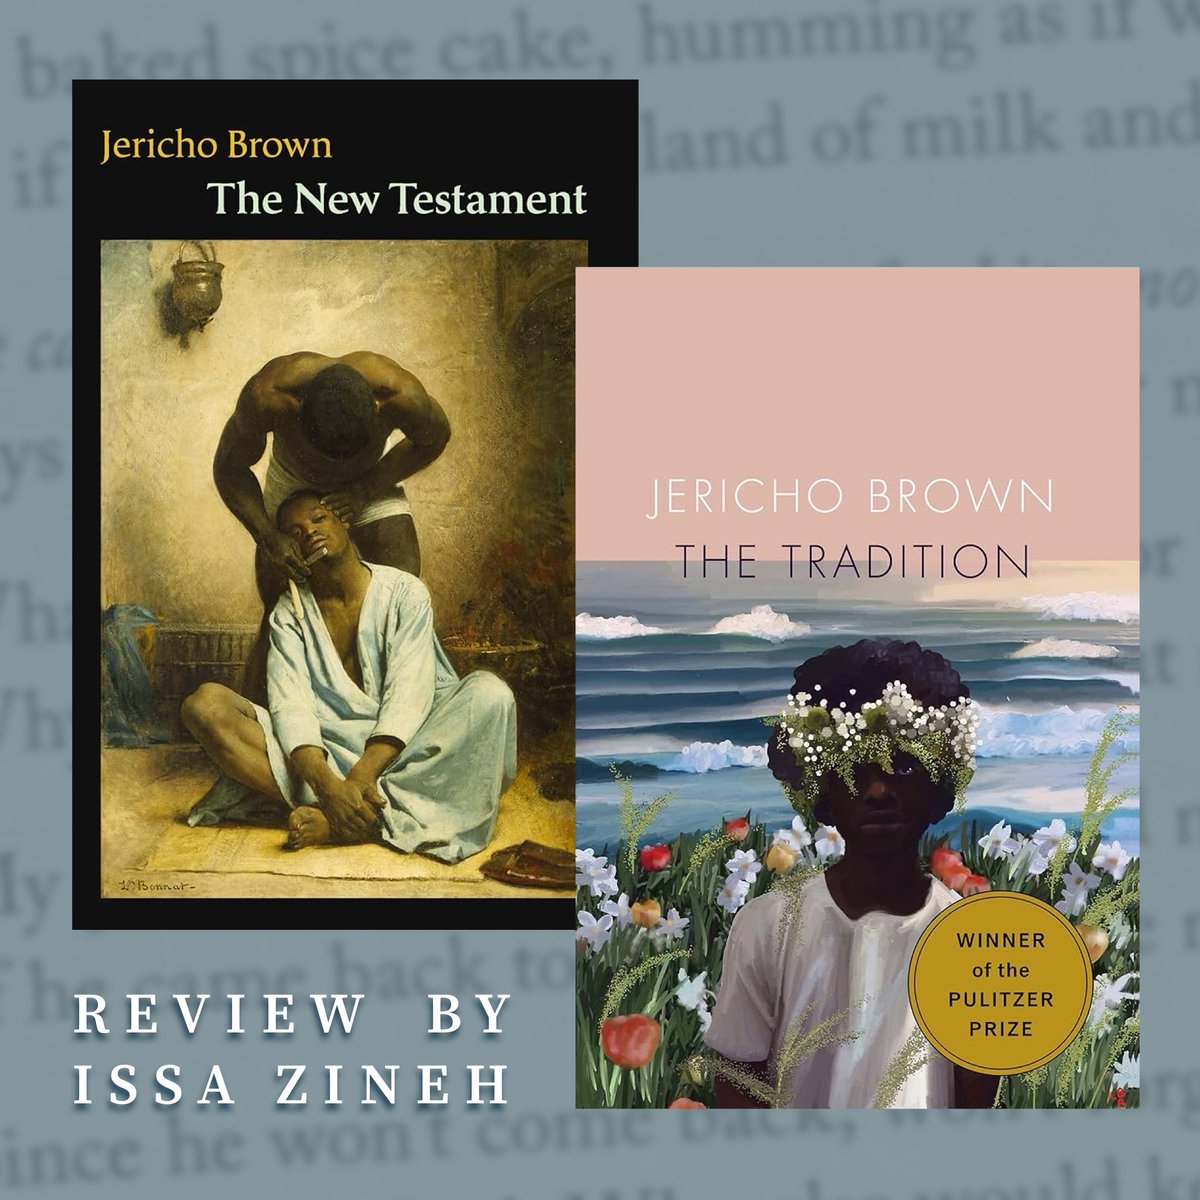 Issa Zineh revisits Jericho Brown’s “The New Testament” and “The Tradition” against the backdrop of inherited conceptions of manhood on LAR today. Read Zineh’s surveyal of these texts here: losangelesreview.org/the-new-testam… @izineh @jerichobrown @CopperCanyonPrs #LARreviews